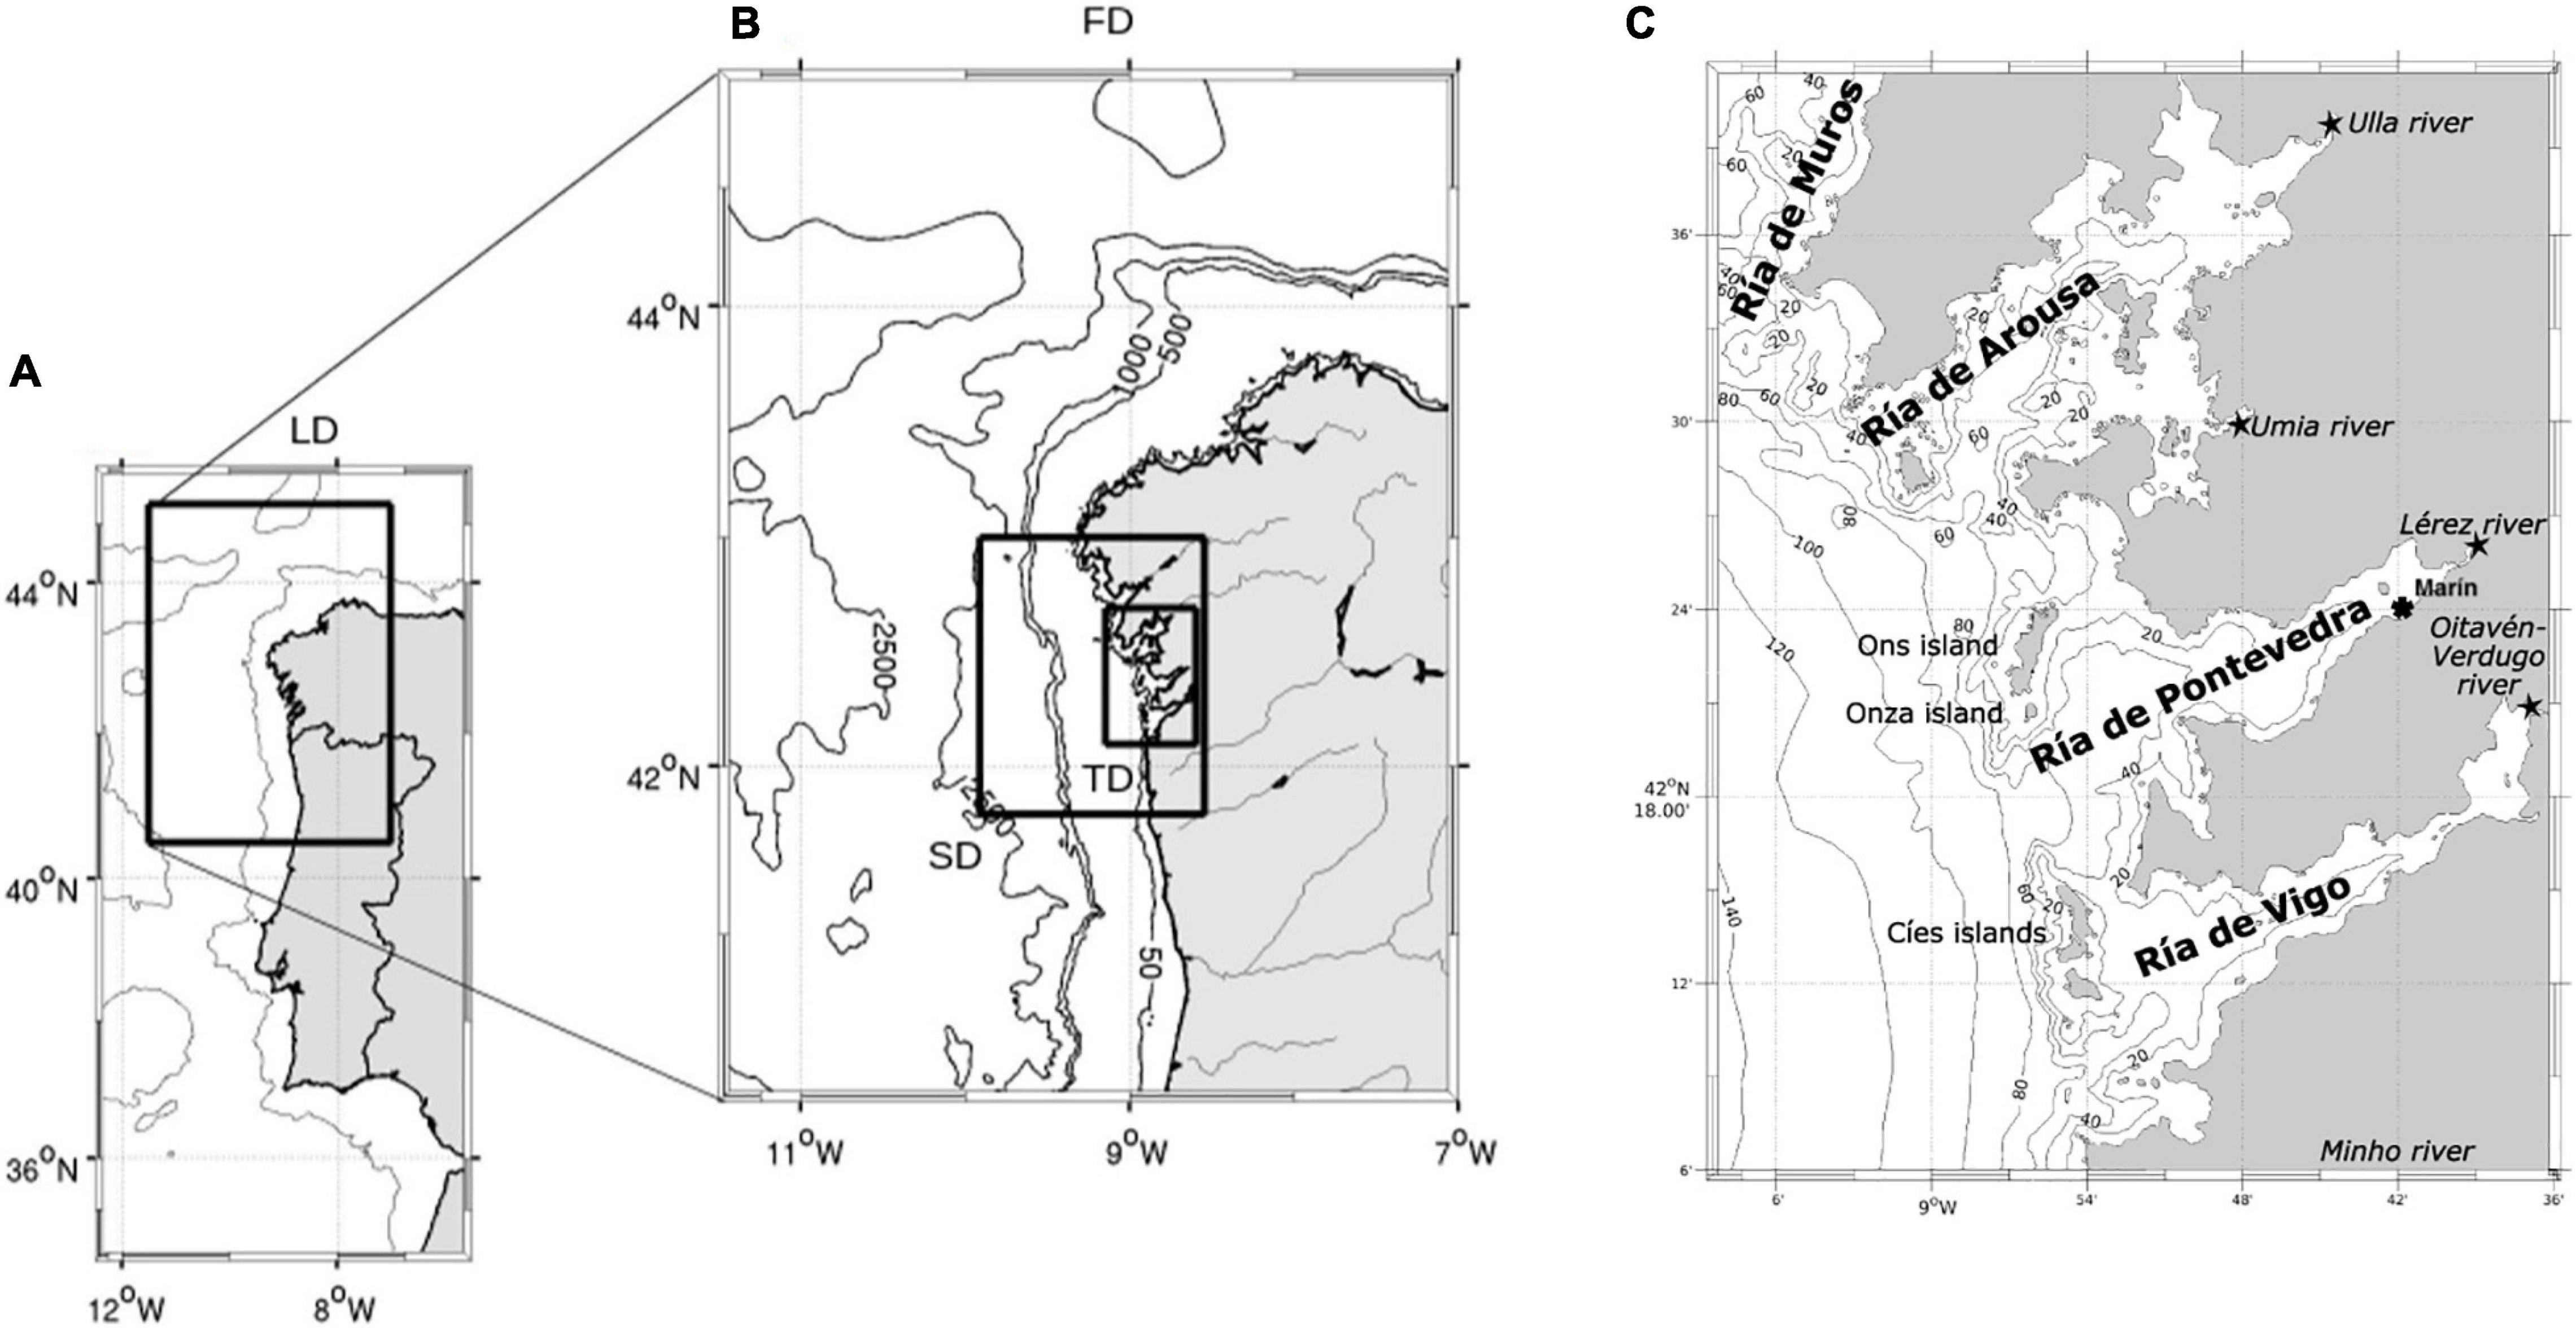 Frontiers | A High-Resolution Modeling Study of the Circulation Patterns at a Coastal Embayment: de Pontevedra (NW Spain) Under Upwelling and Downwelling Conditions | Marine